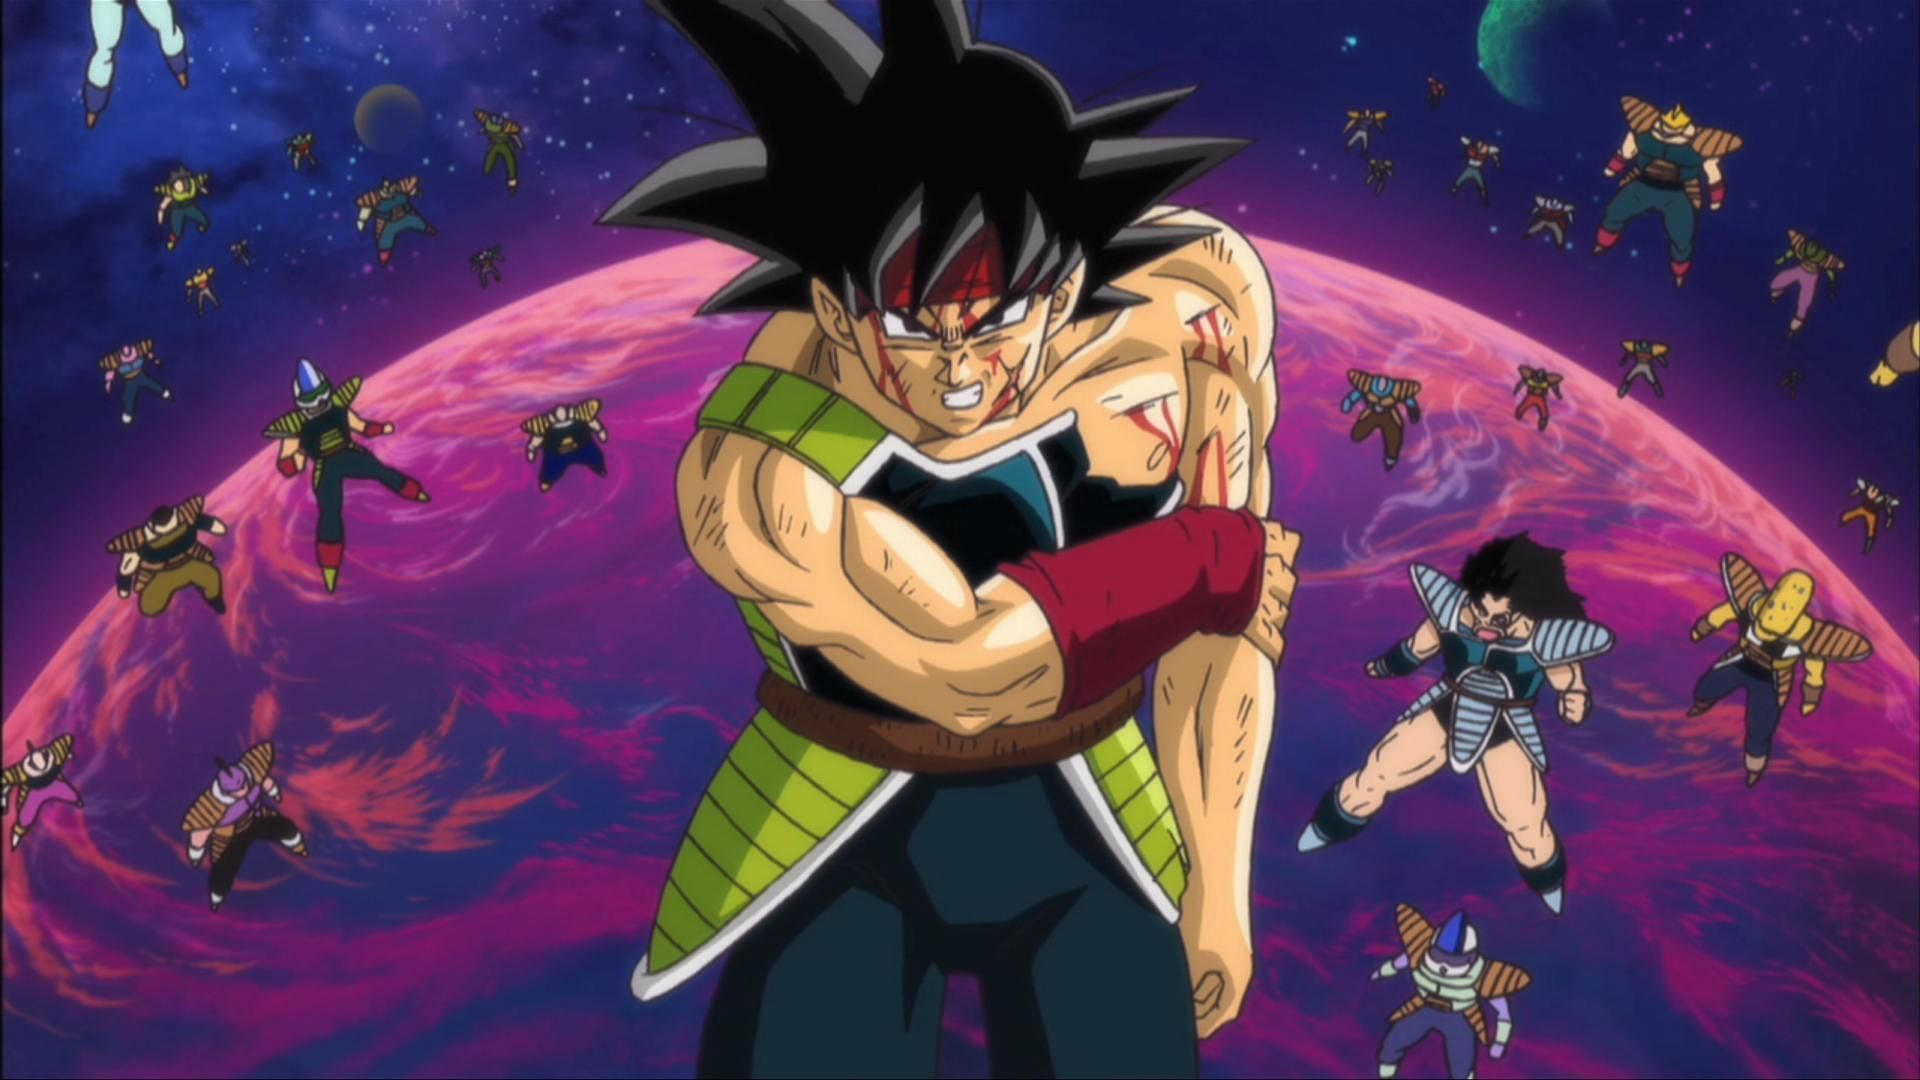 Bardock as seen in the franchise&#039;s anime (Image via Toei Animation)